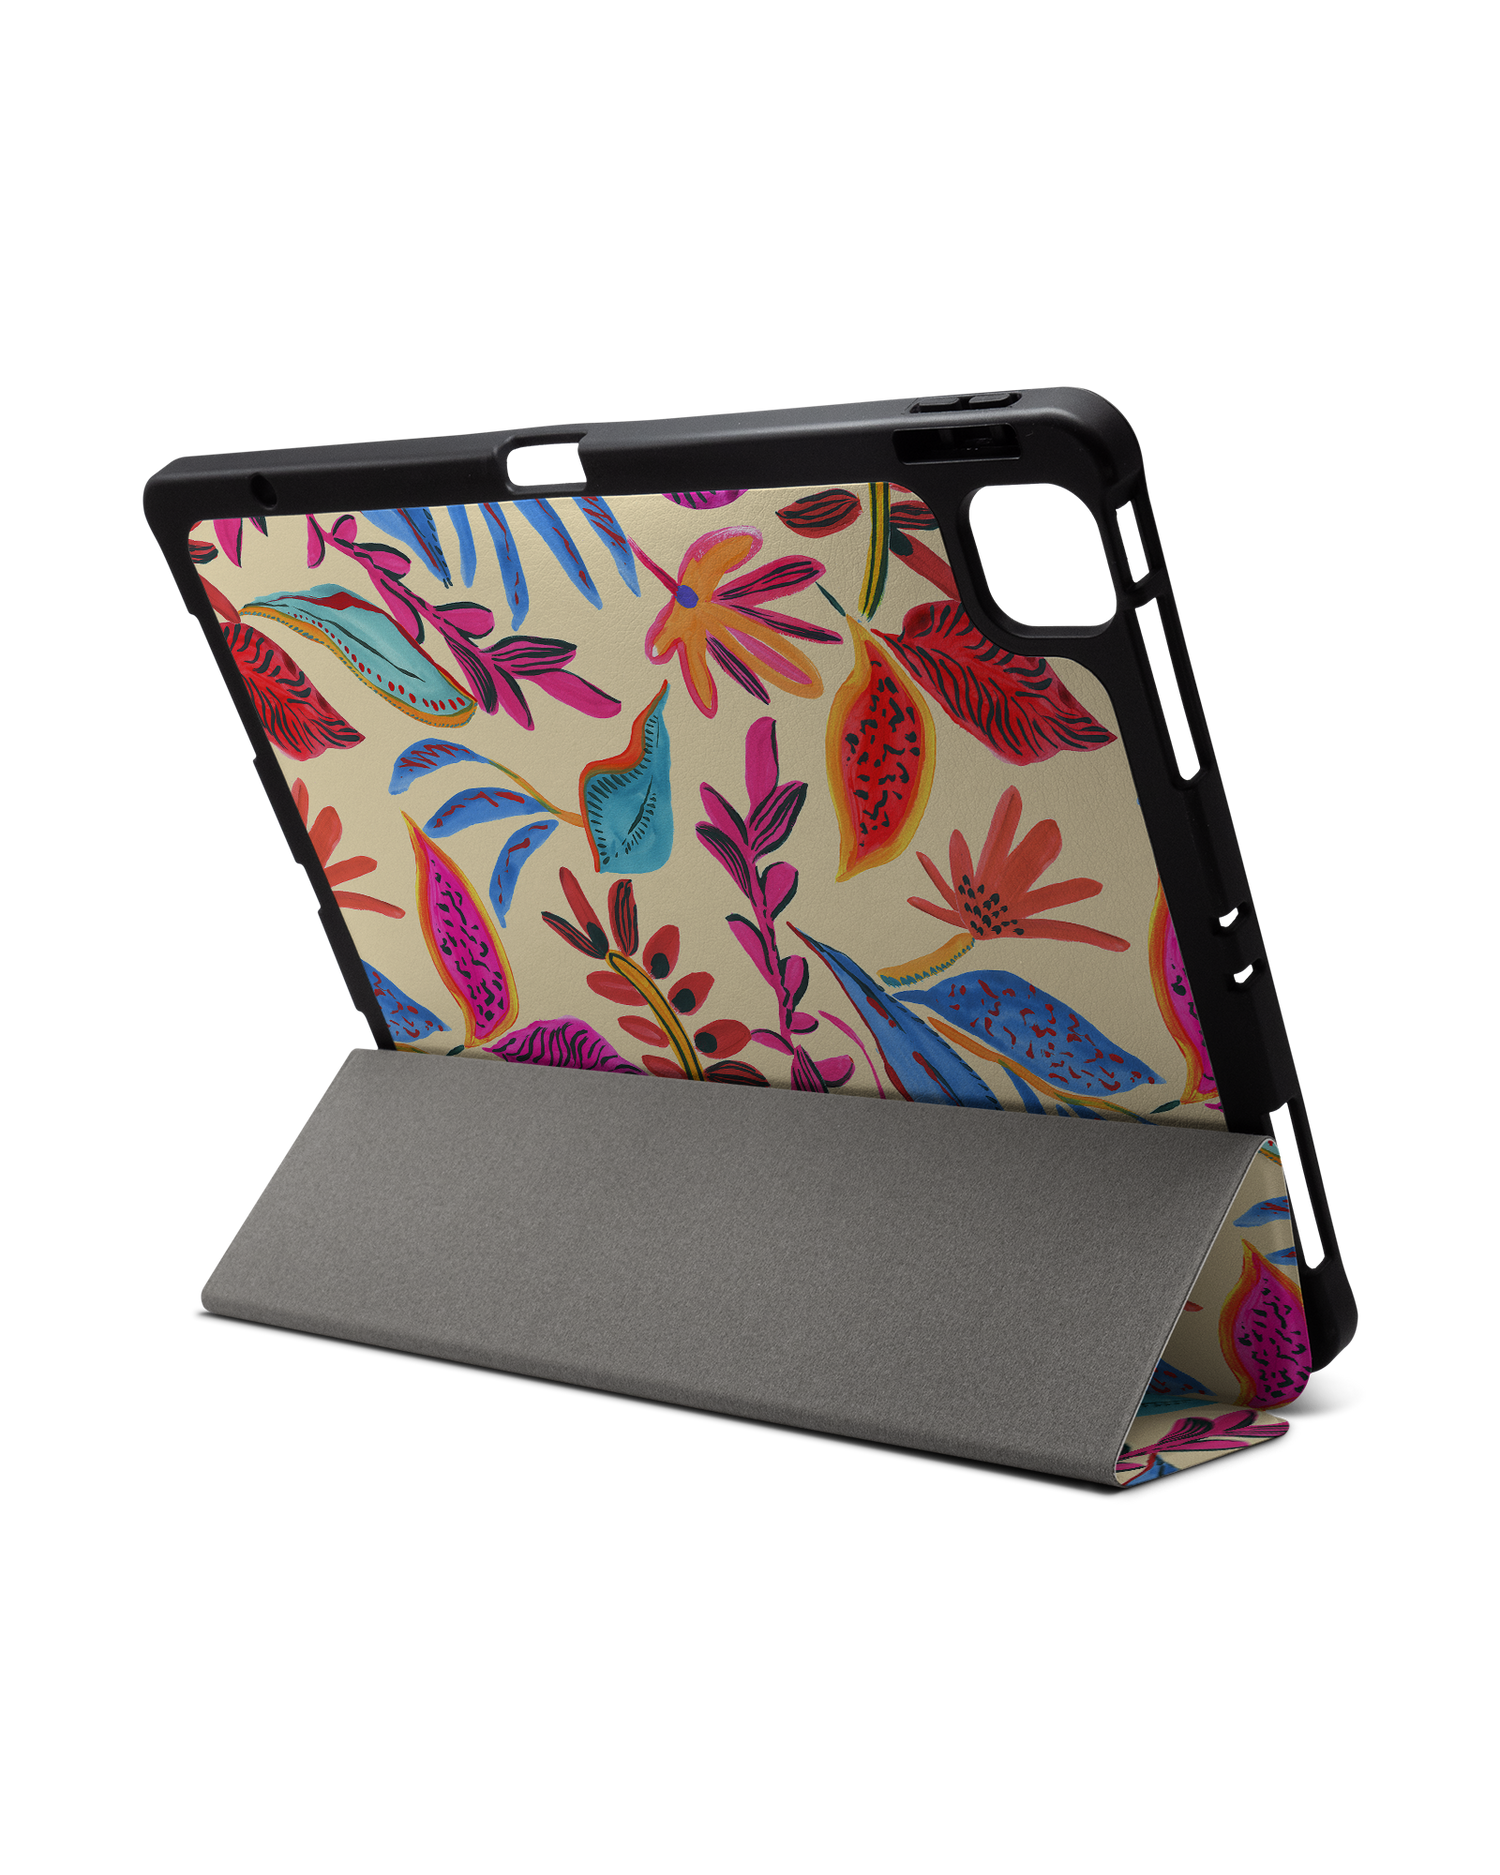 Painterly Spring Leaves iPad Case with Pencil Holder for Apple iPad Pro 6 12.9